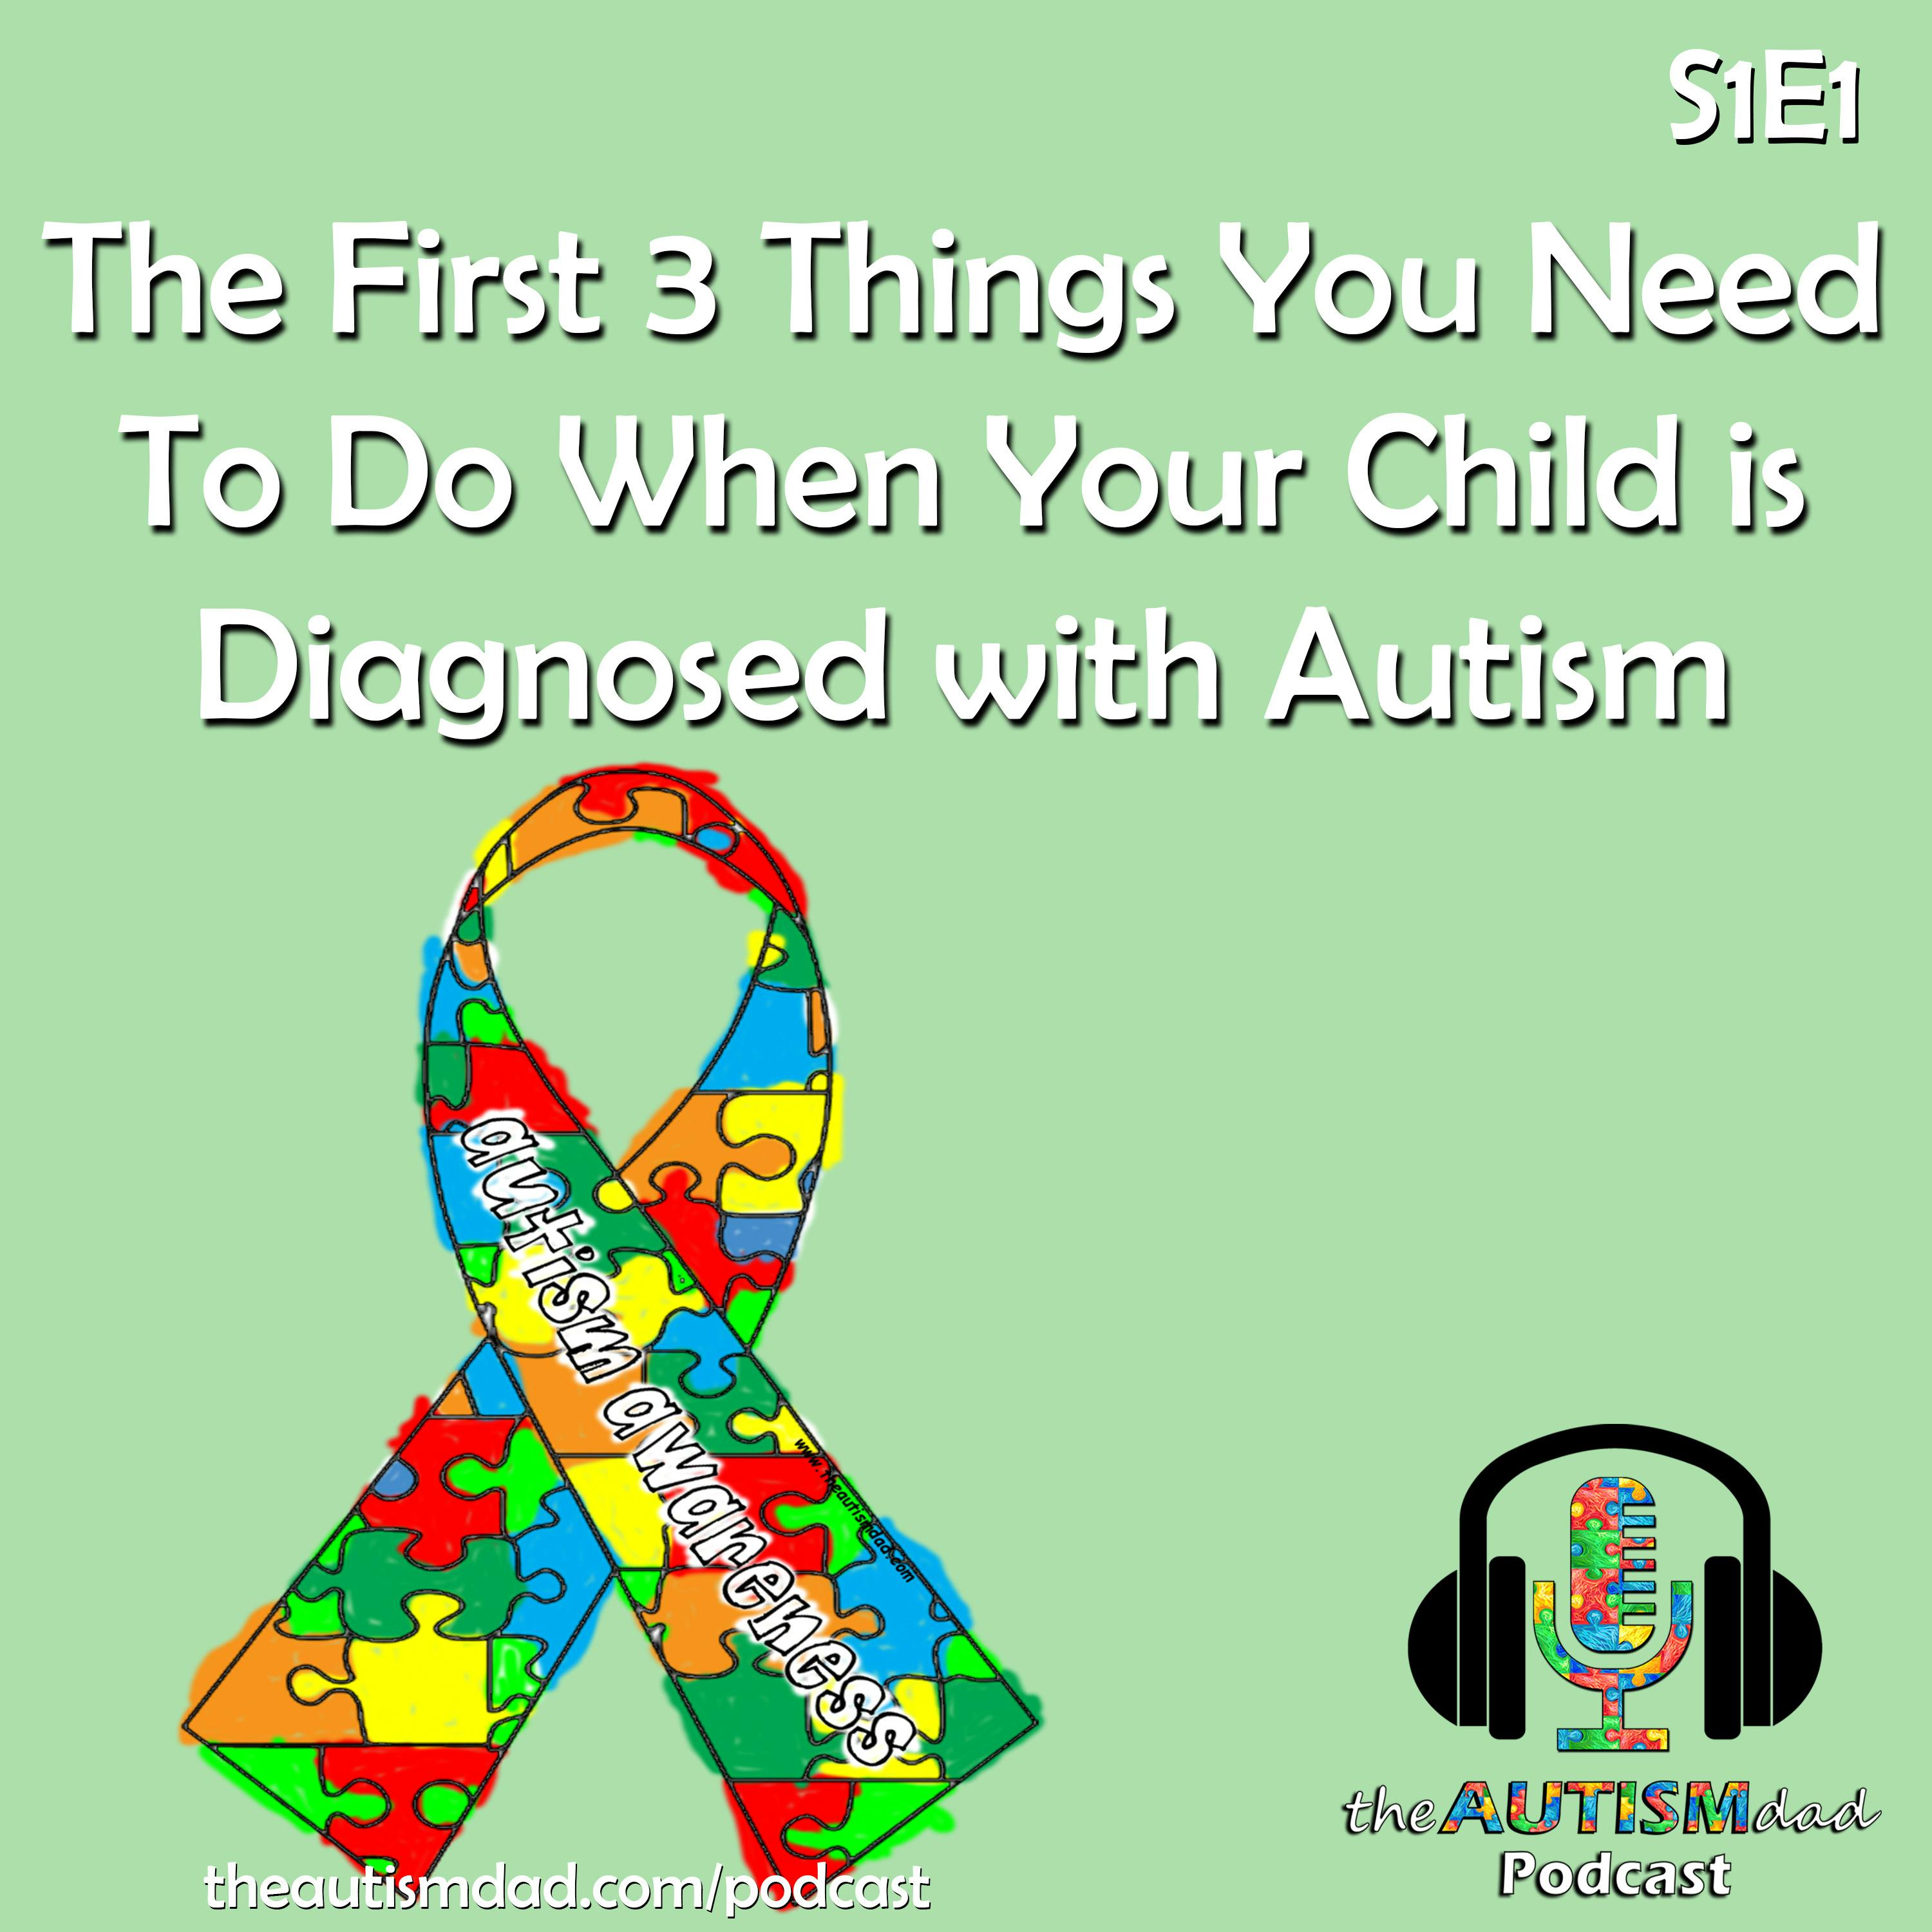 The First 3 Things You Need To Do When Your Child is Diagnosed with Autism Image